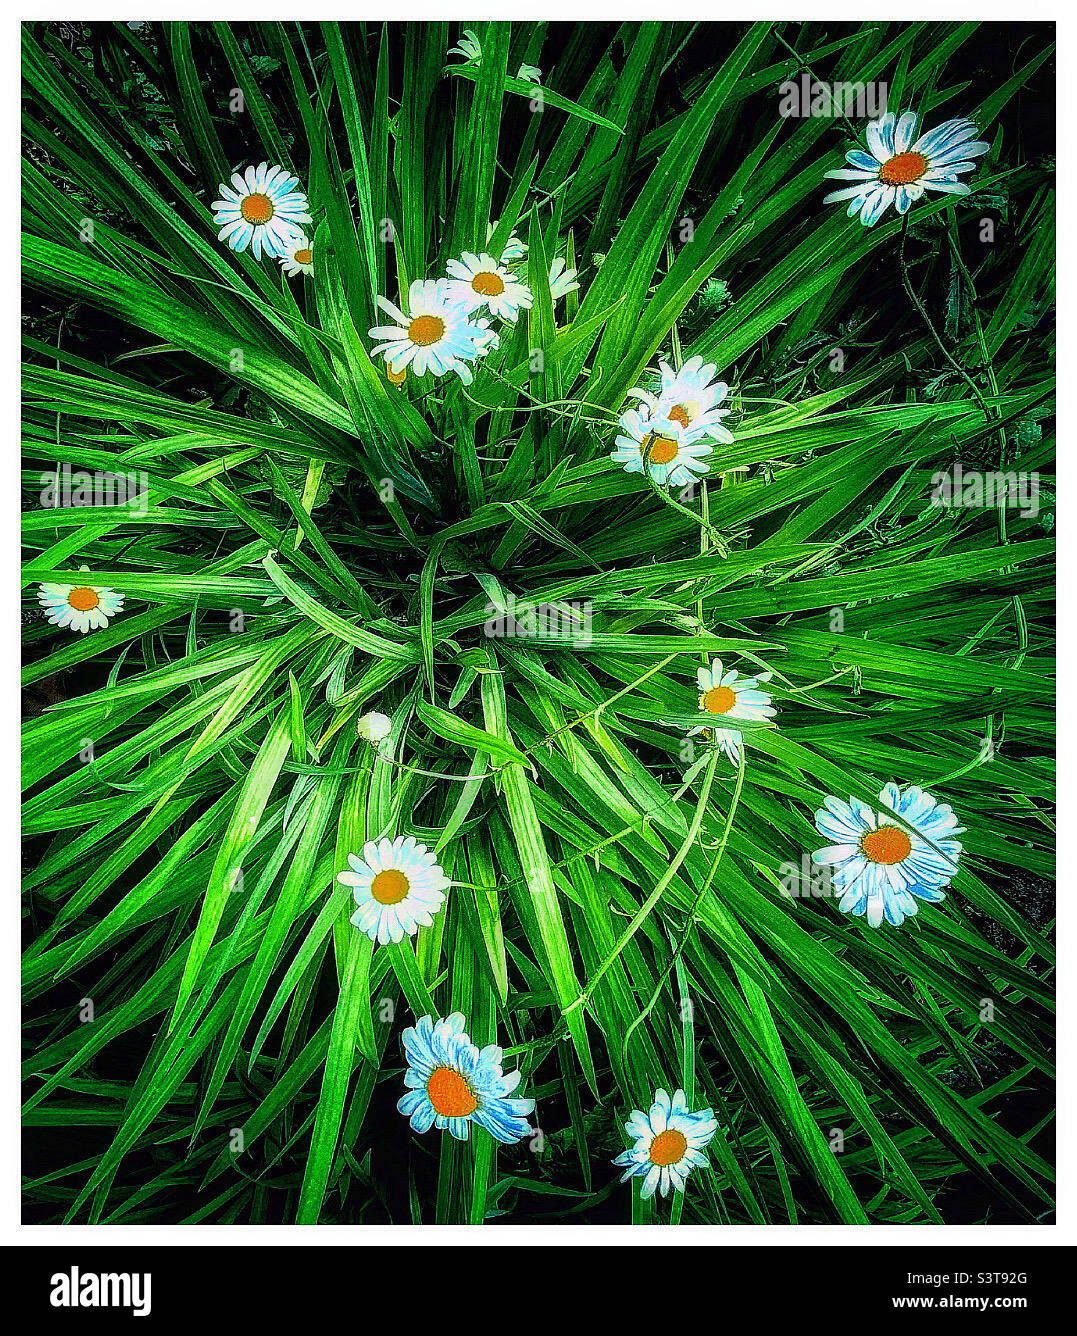 Daisies and long grass Stock Photo